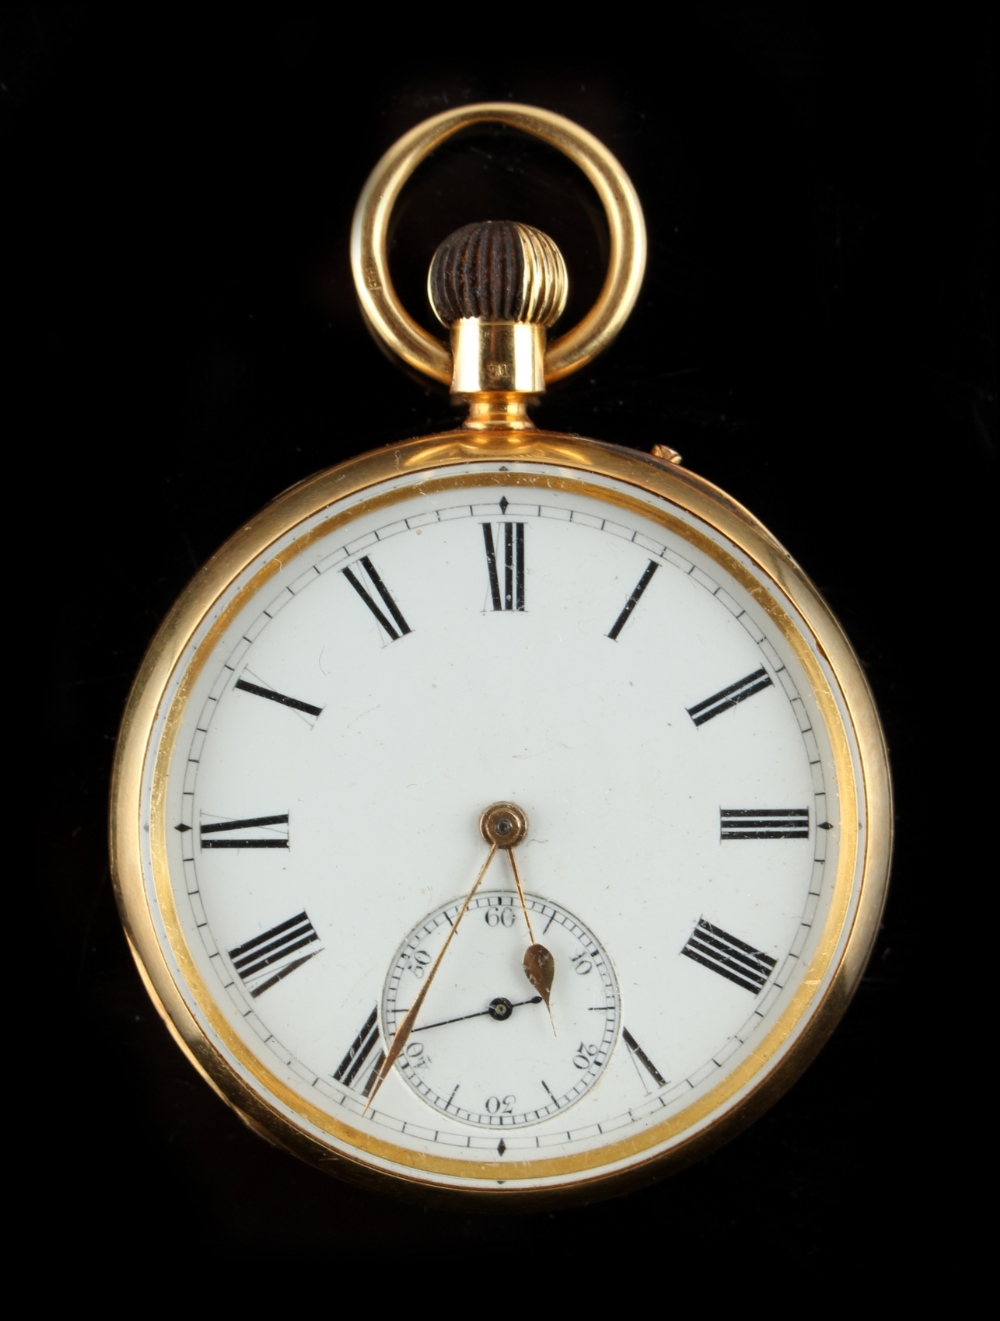 Property of a gentleman - an 18ct gold cased pocket watch, the movement engraved 'No.1002' and '